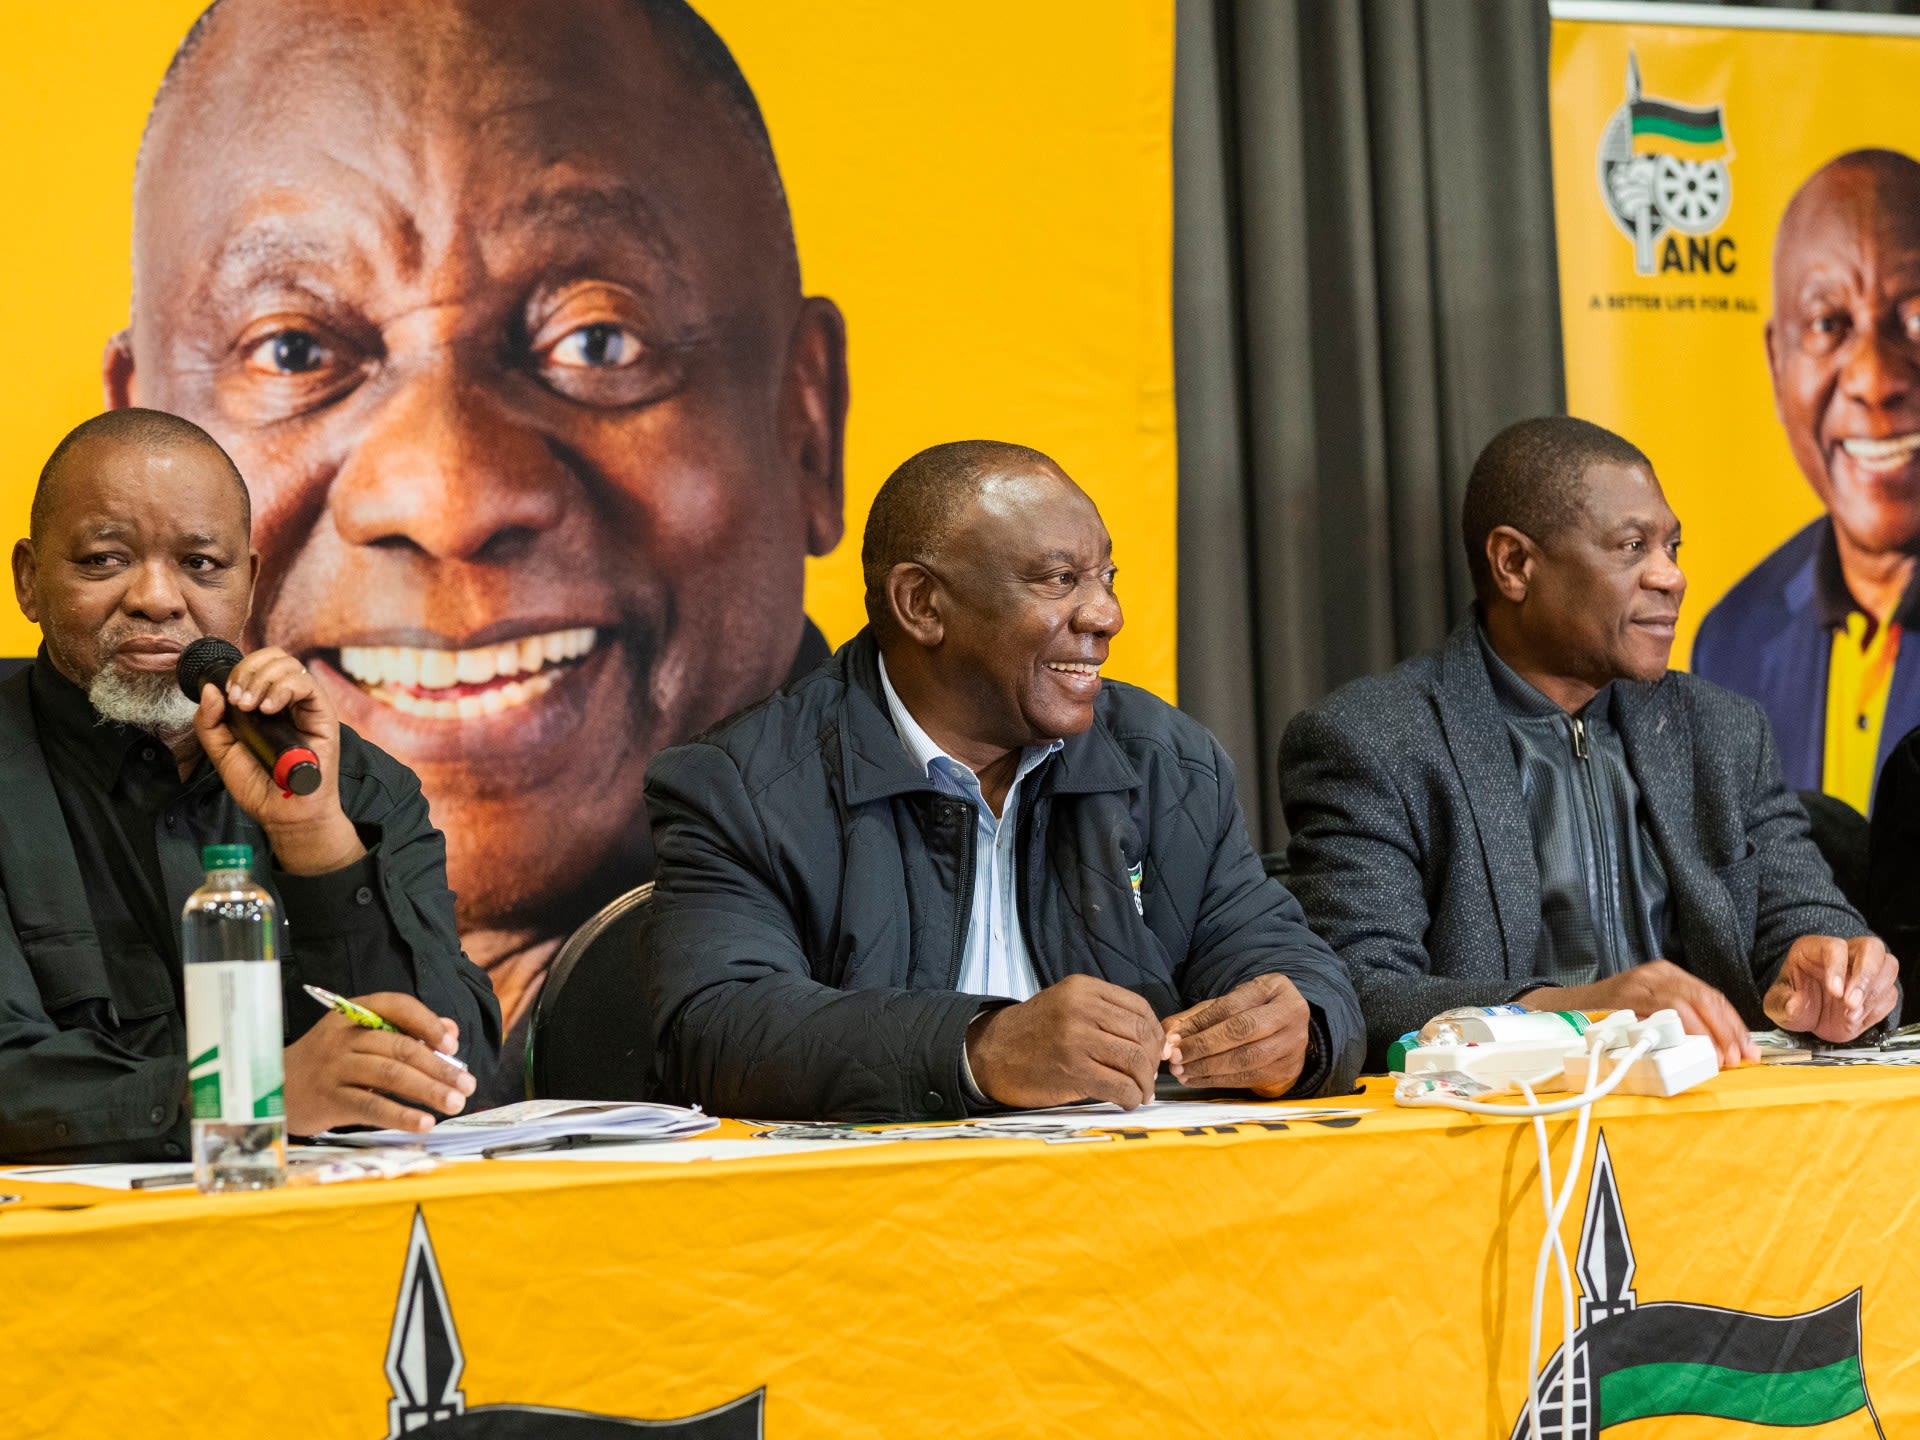 Why South Africa’s ANC wants a ‘National Unity’ gov’t after losing majority